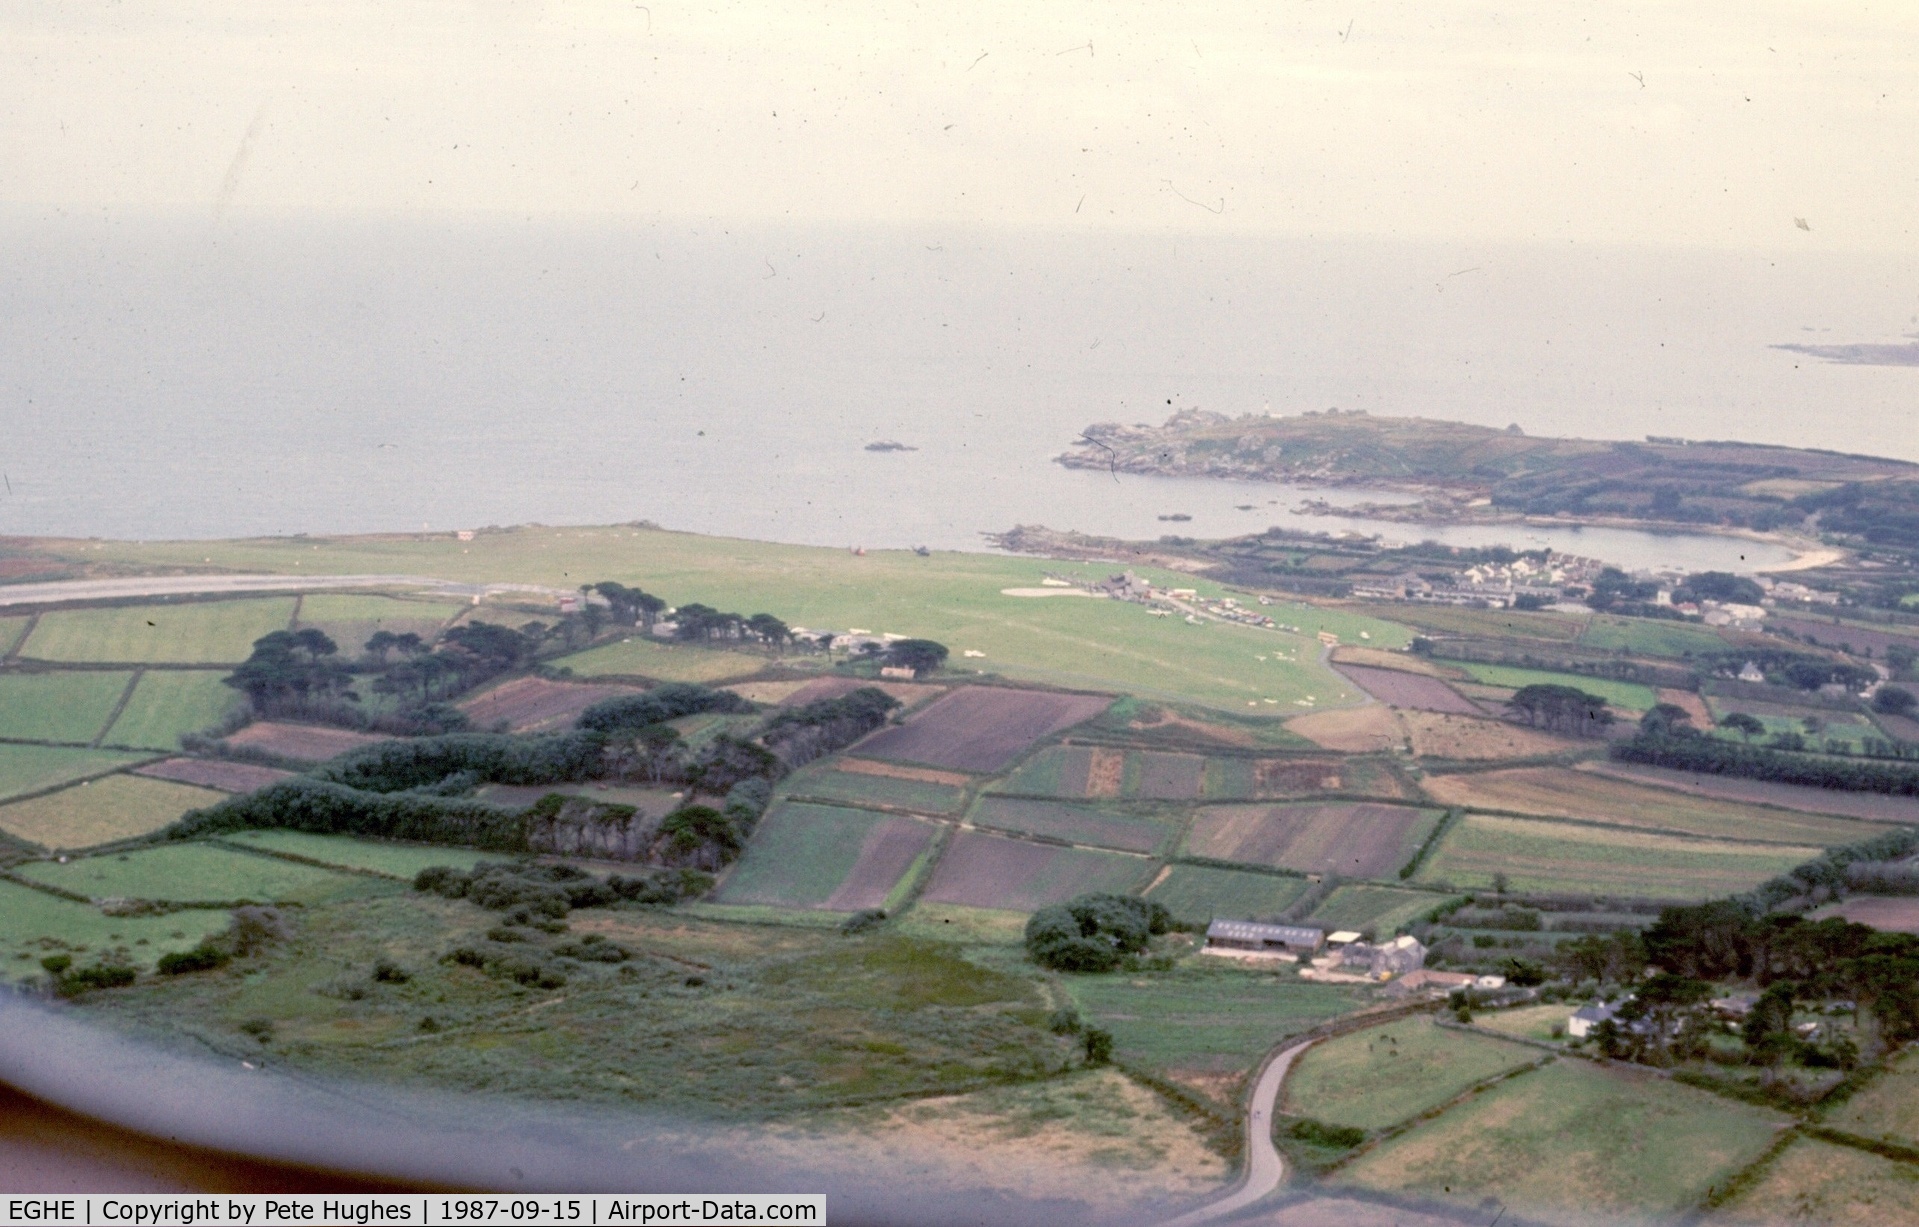 St. Mary's Airport, St. Mary's, England United Kingdom (EGHE) - St Mary's Isles of Scilly seen from DH84 Dragon EI-ABI